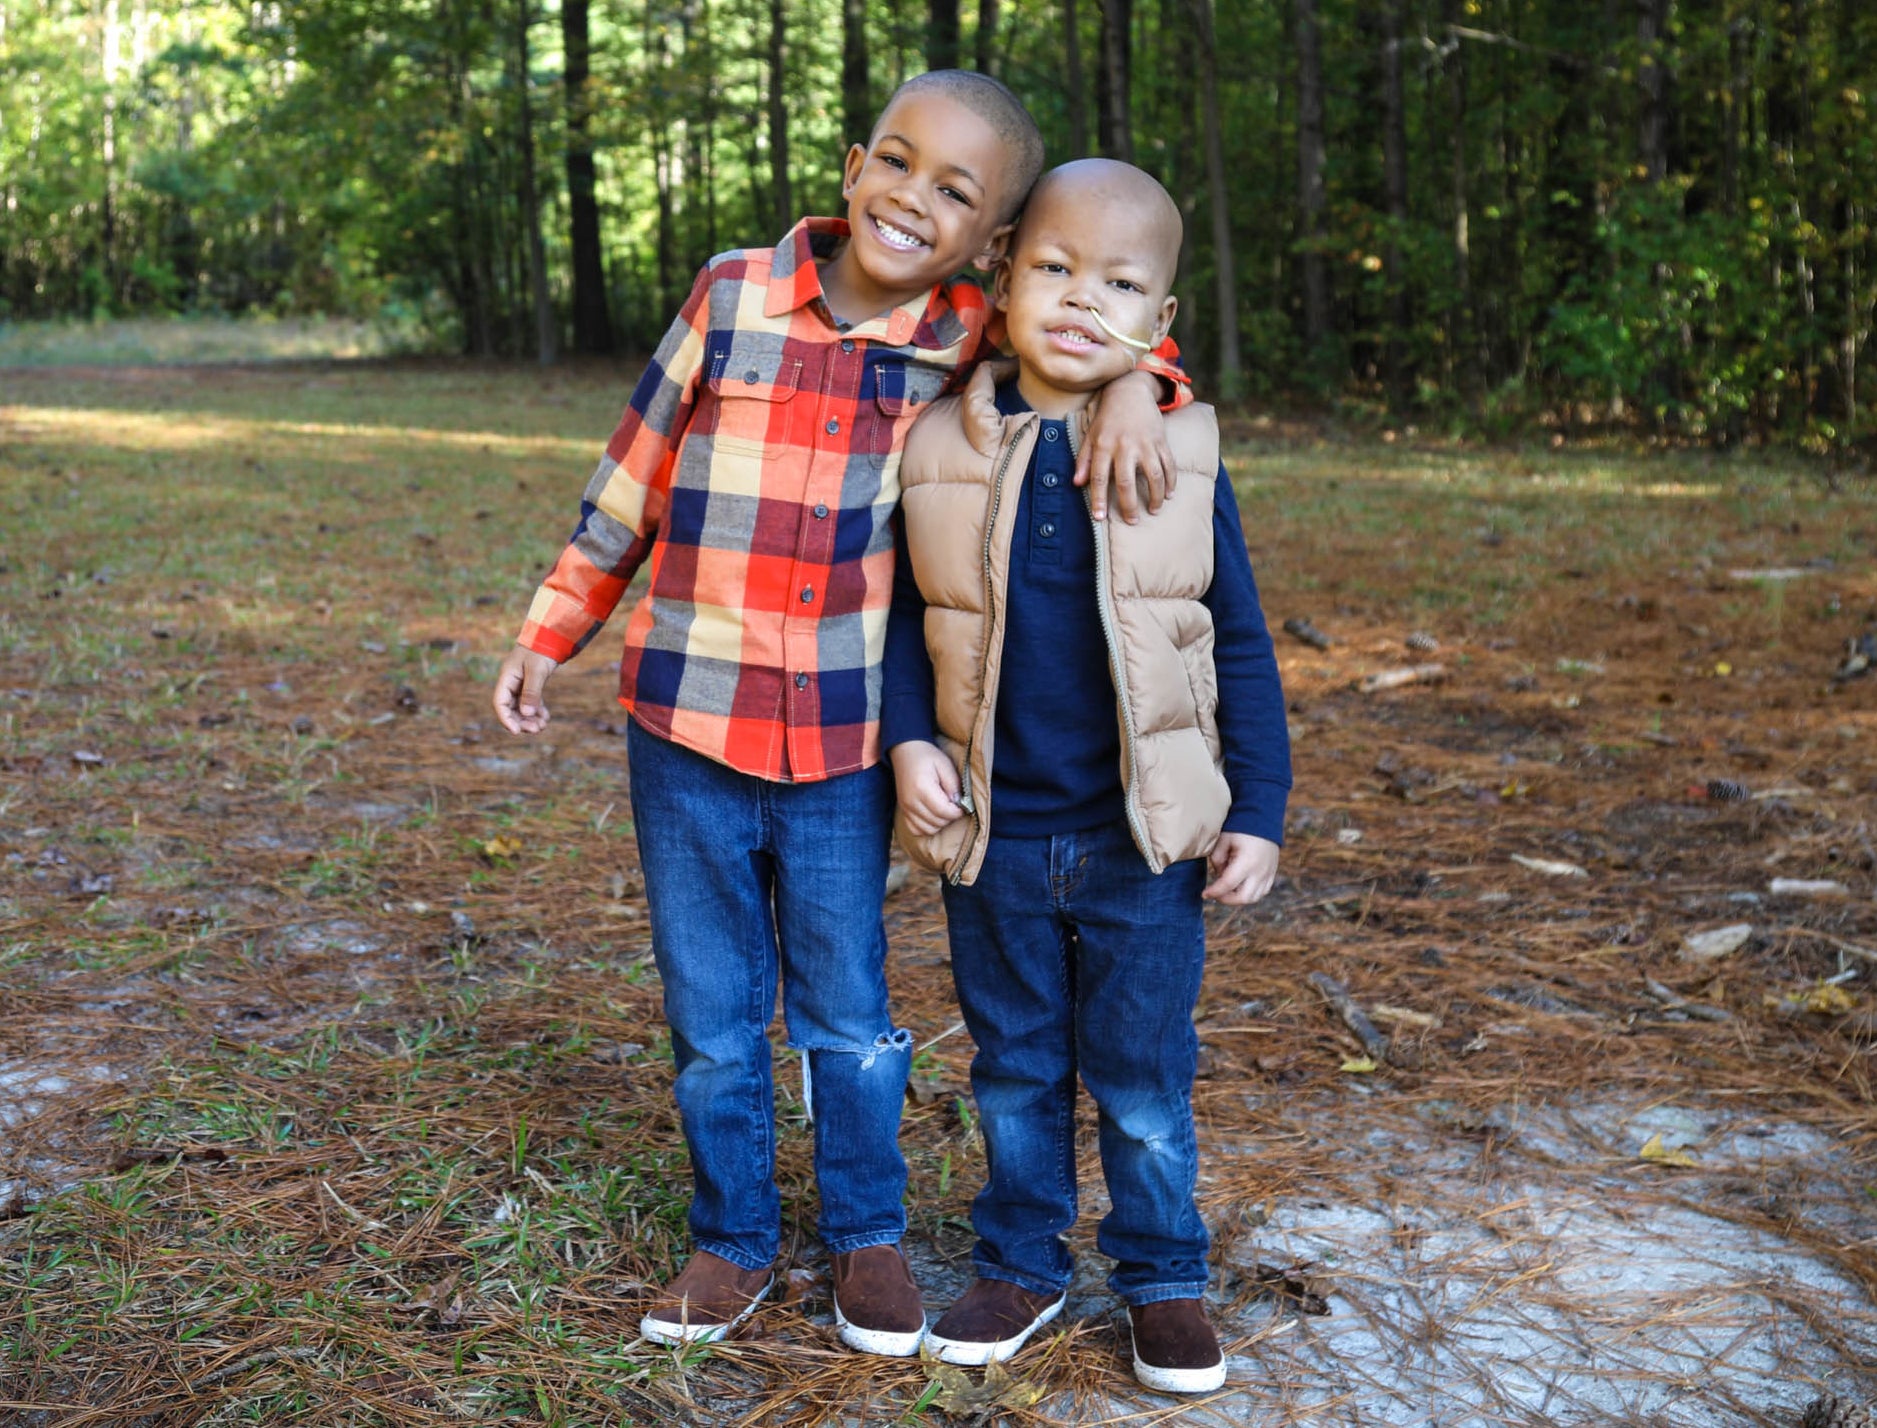 Two young boys smile with their arms around each other, standing in the woods